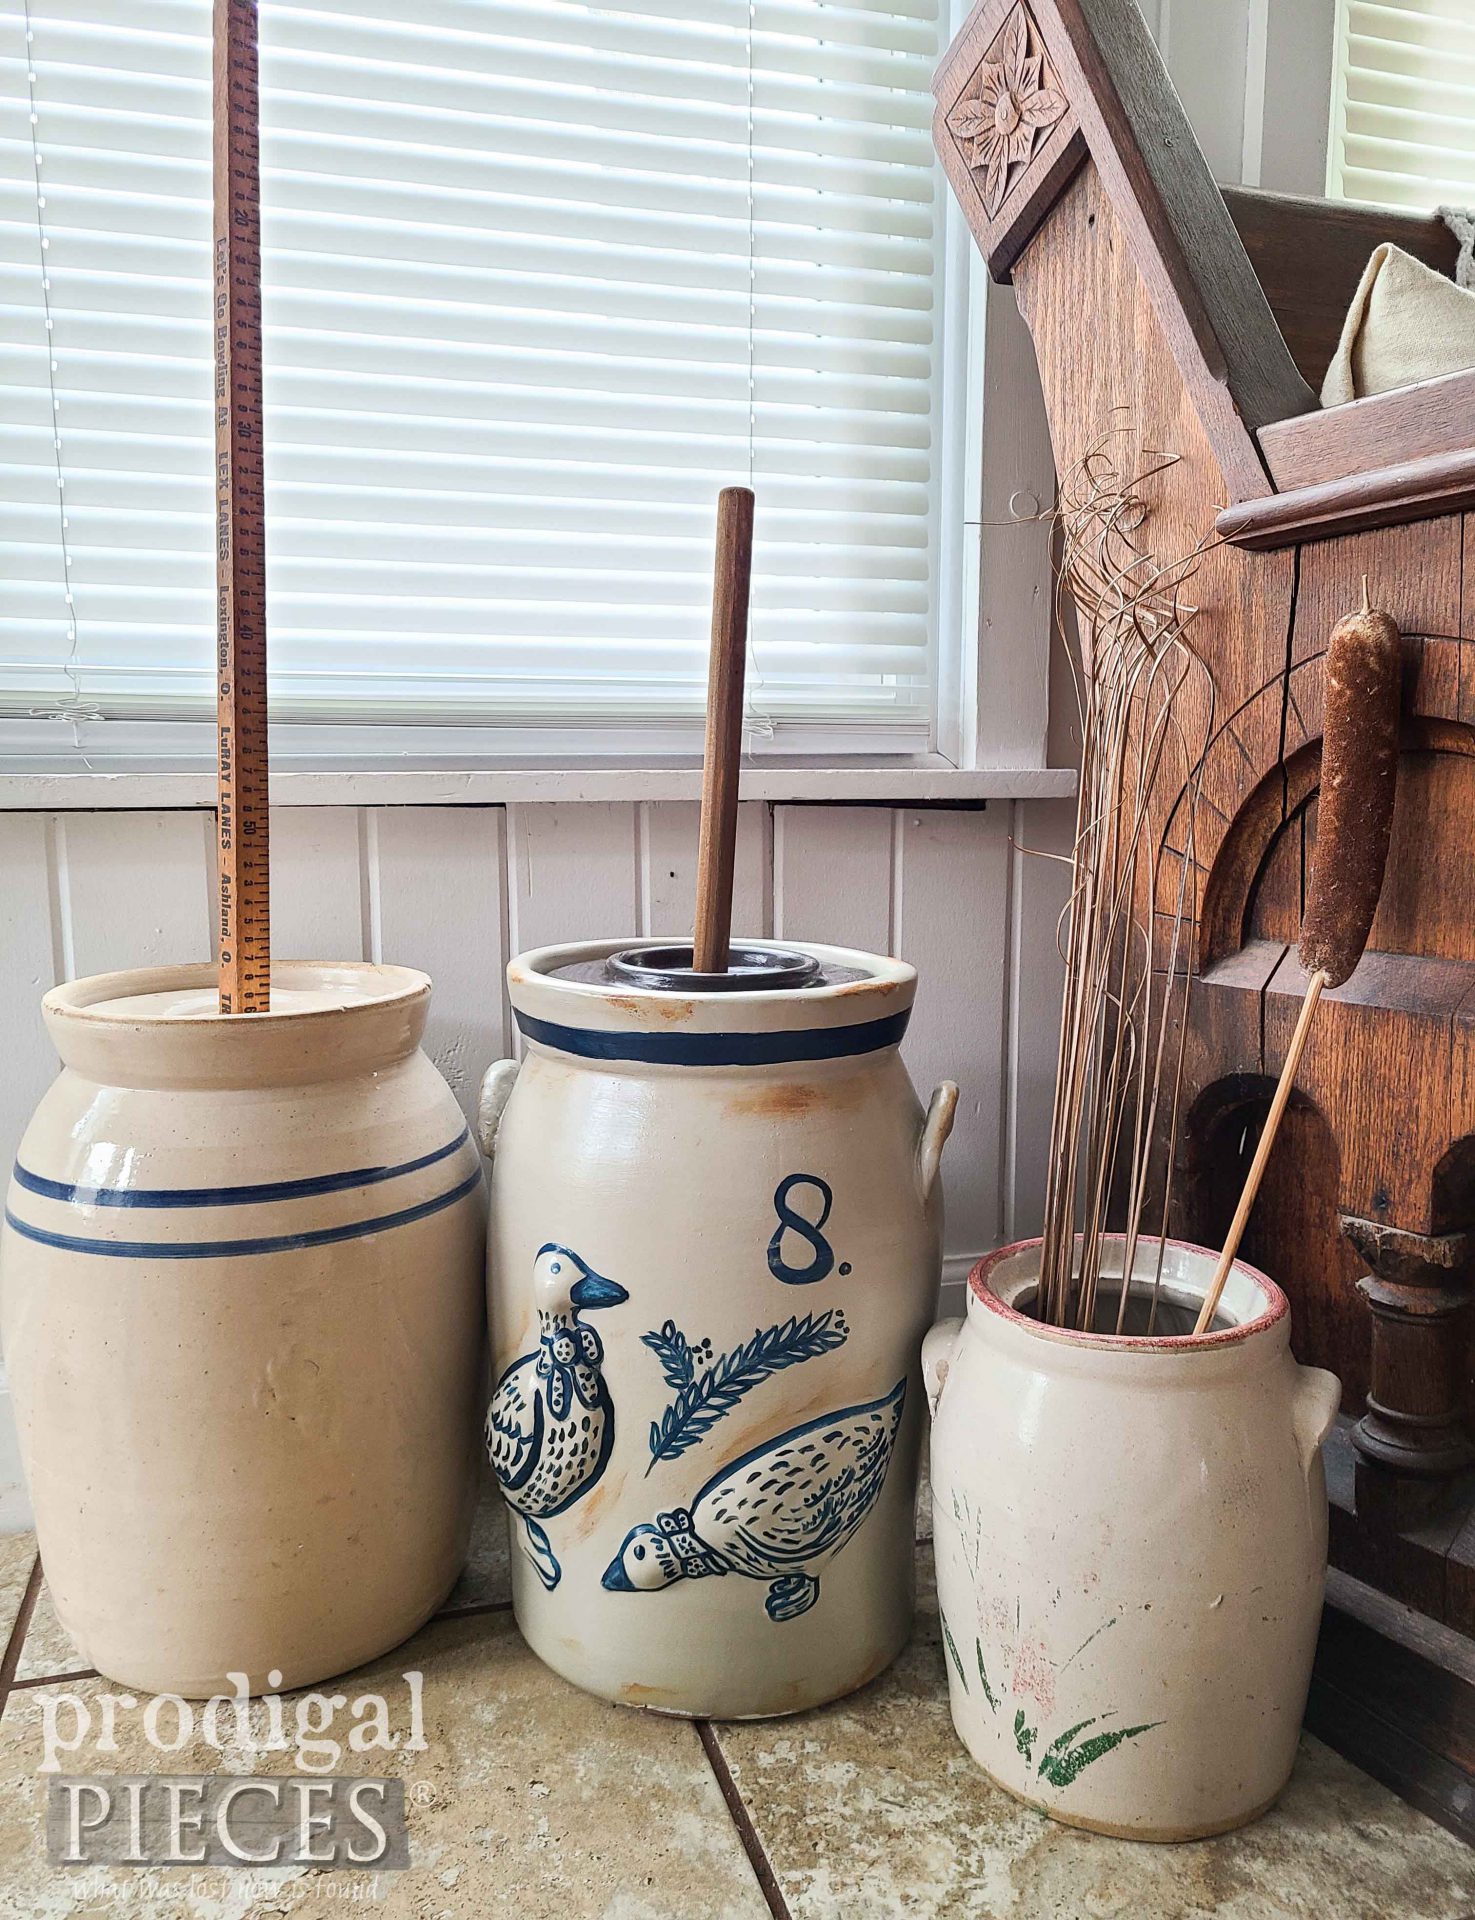 Vintage and Antique Butter Churns by Larissa of Prodigal Pieces | prodigalpieces.com #prodigalpieces #diy #farmhouse